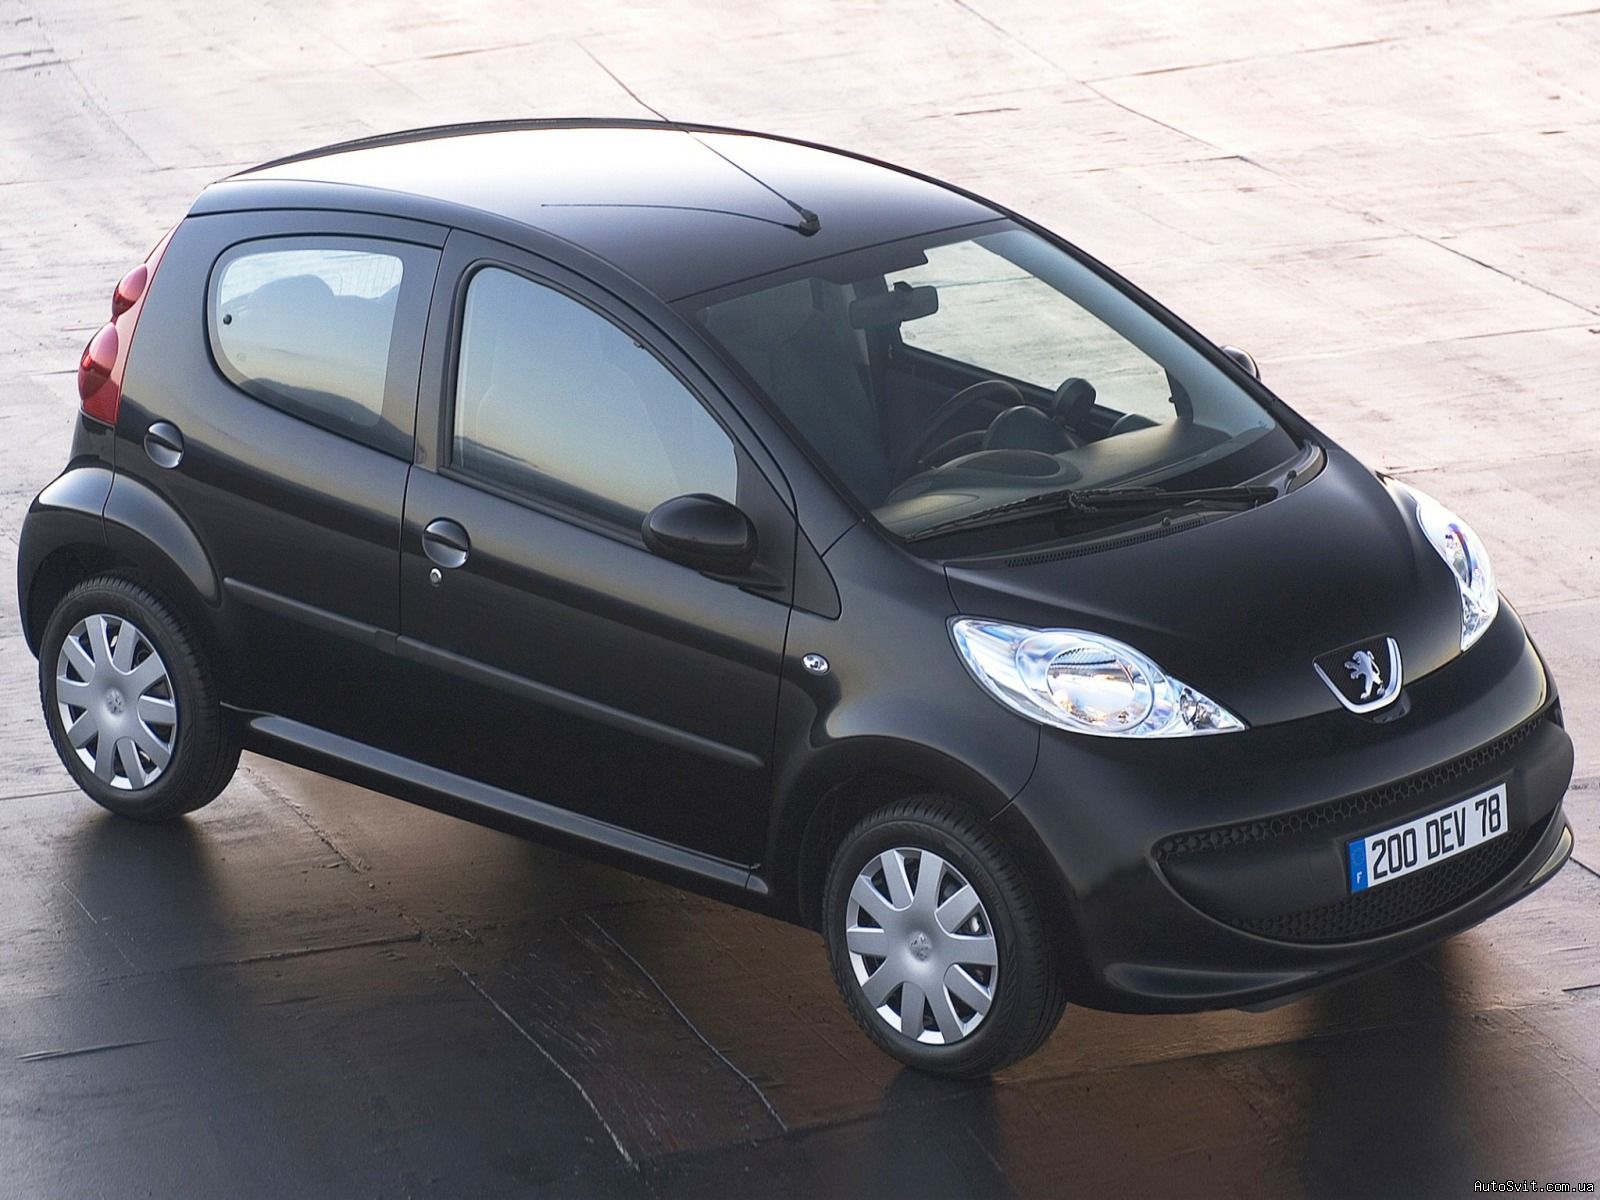 Peugeot 107 2013 Review, Amazing Pictures and Images